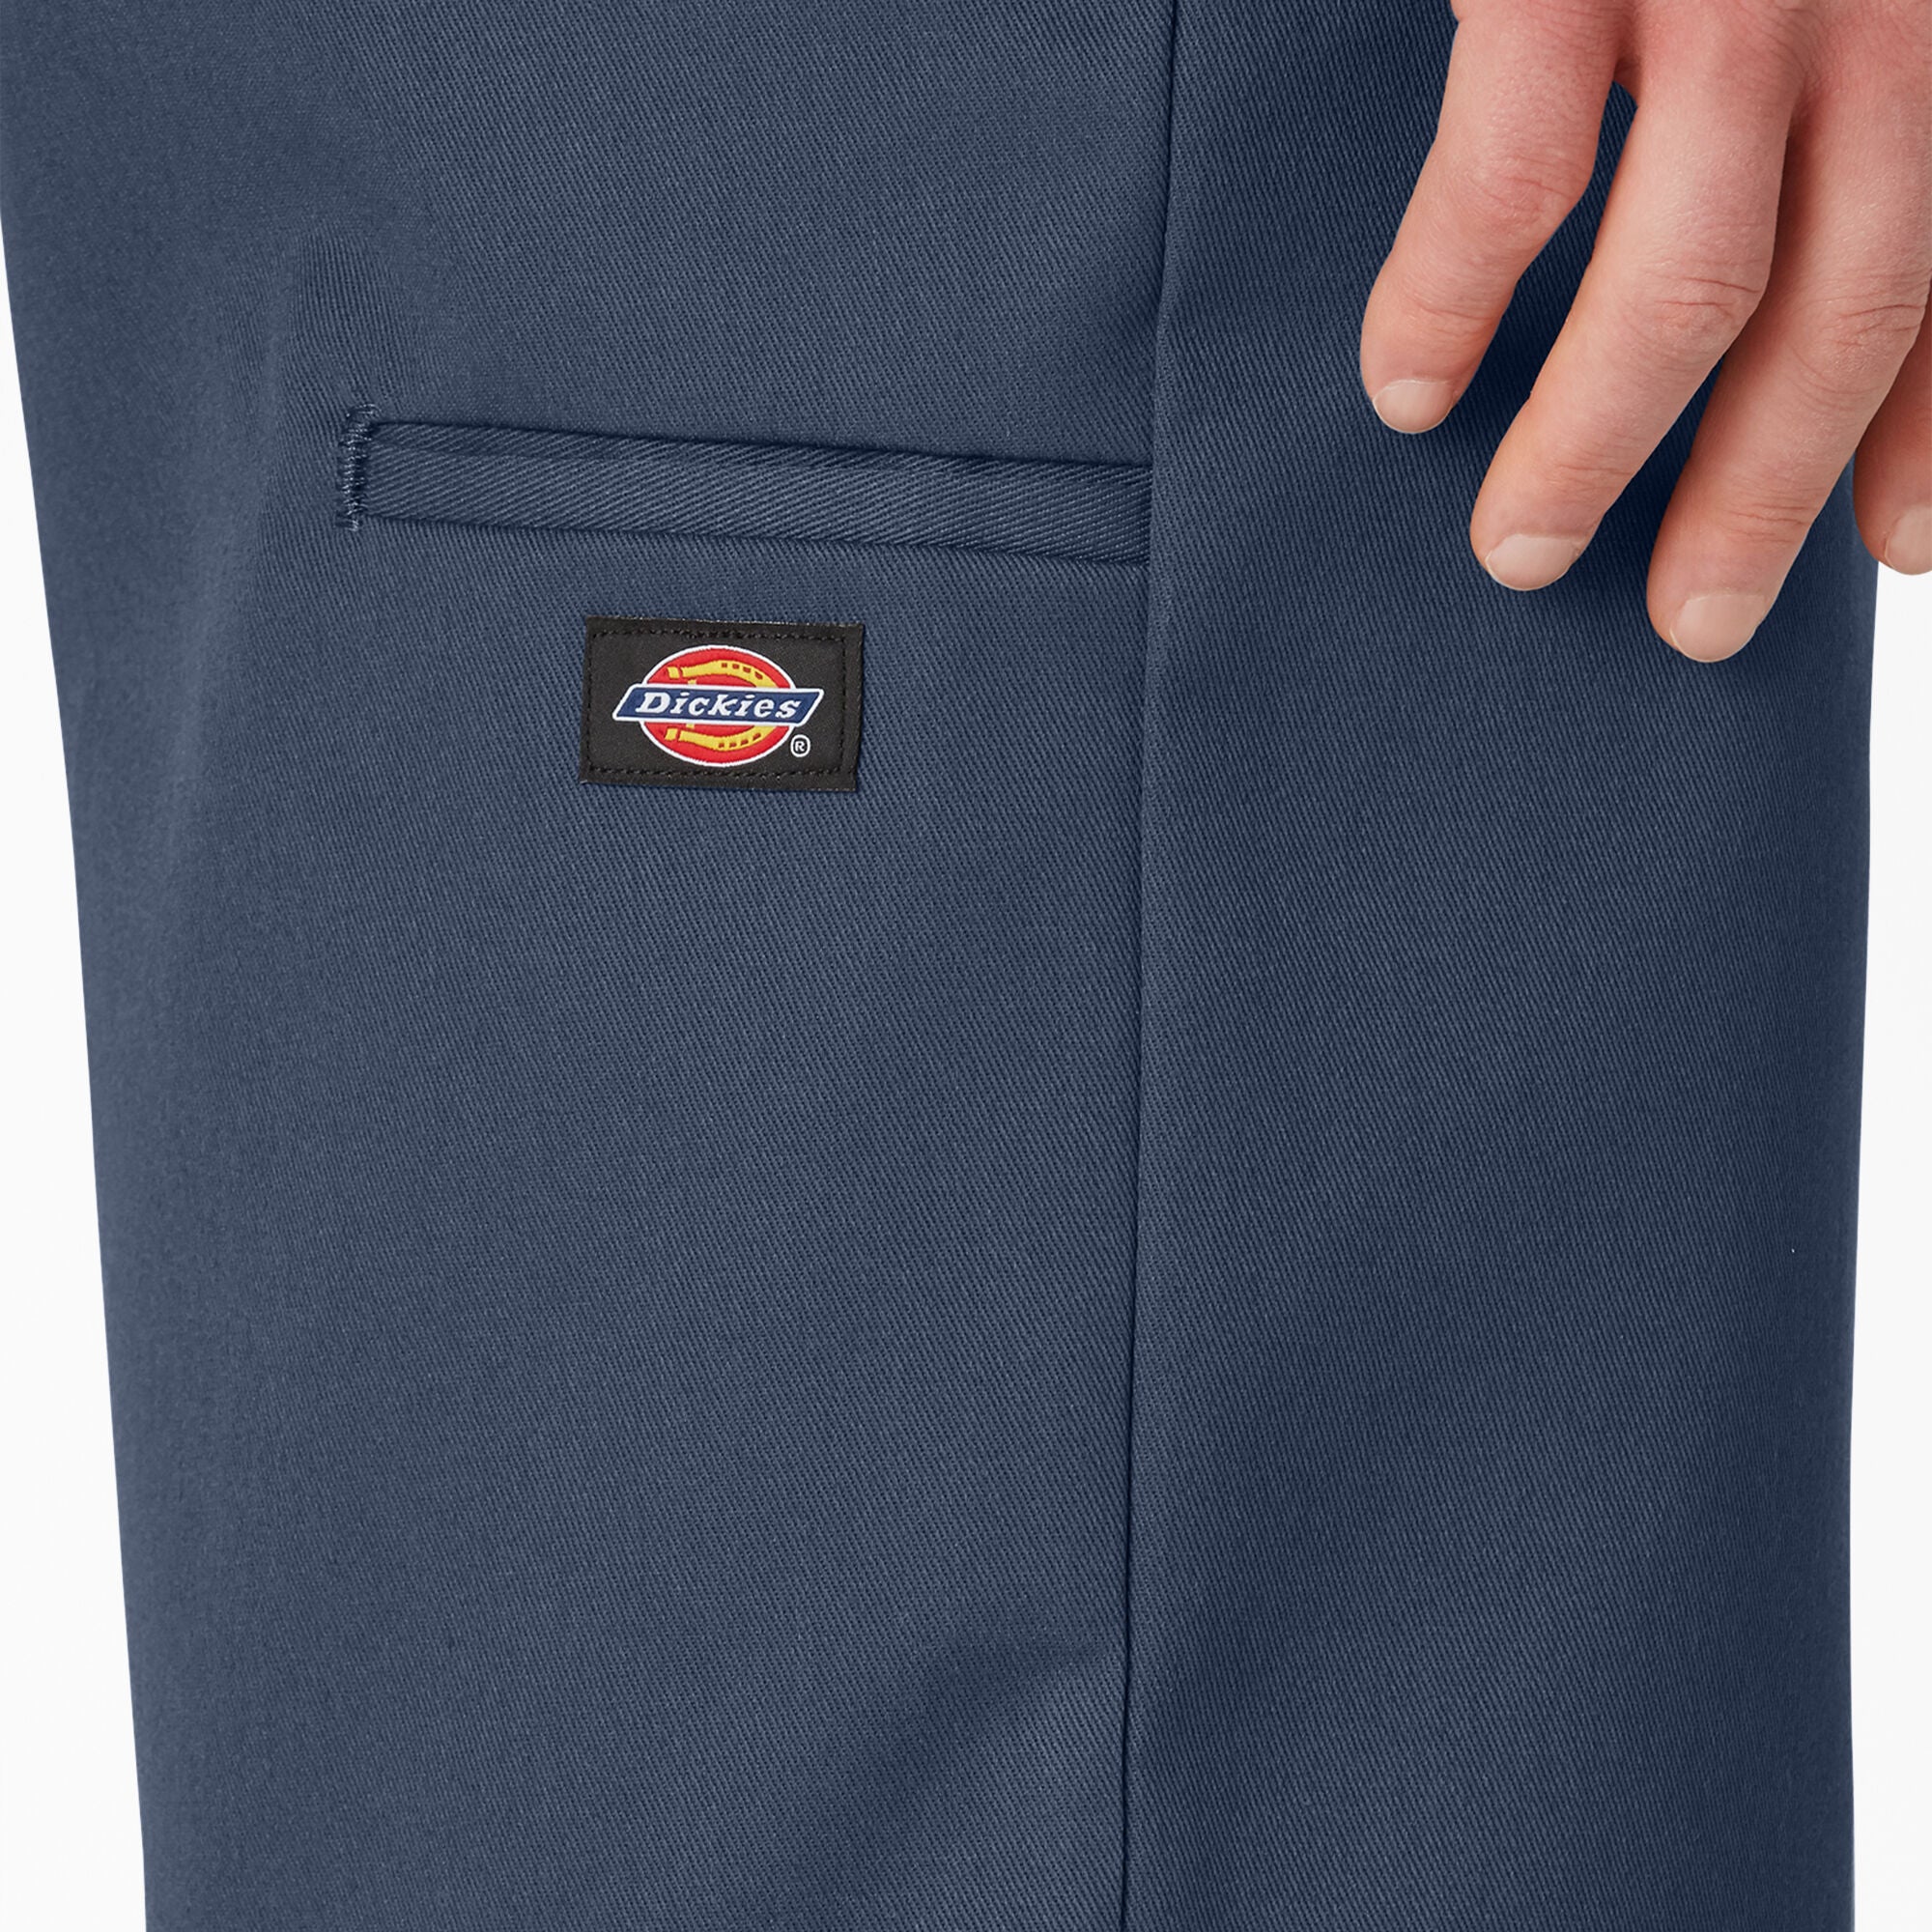 Dickies Loose Fit Flat Front Work Shorts, 13", Navy Blue